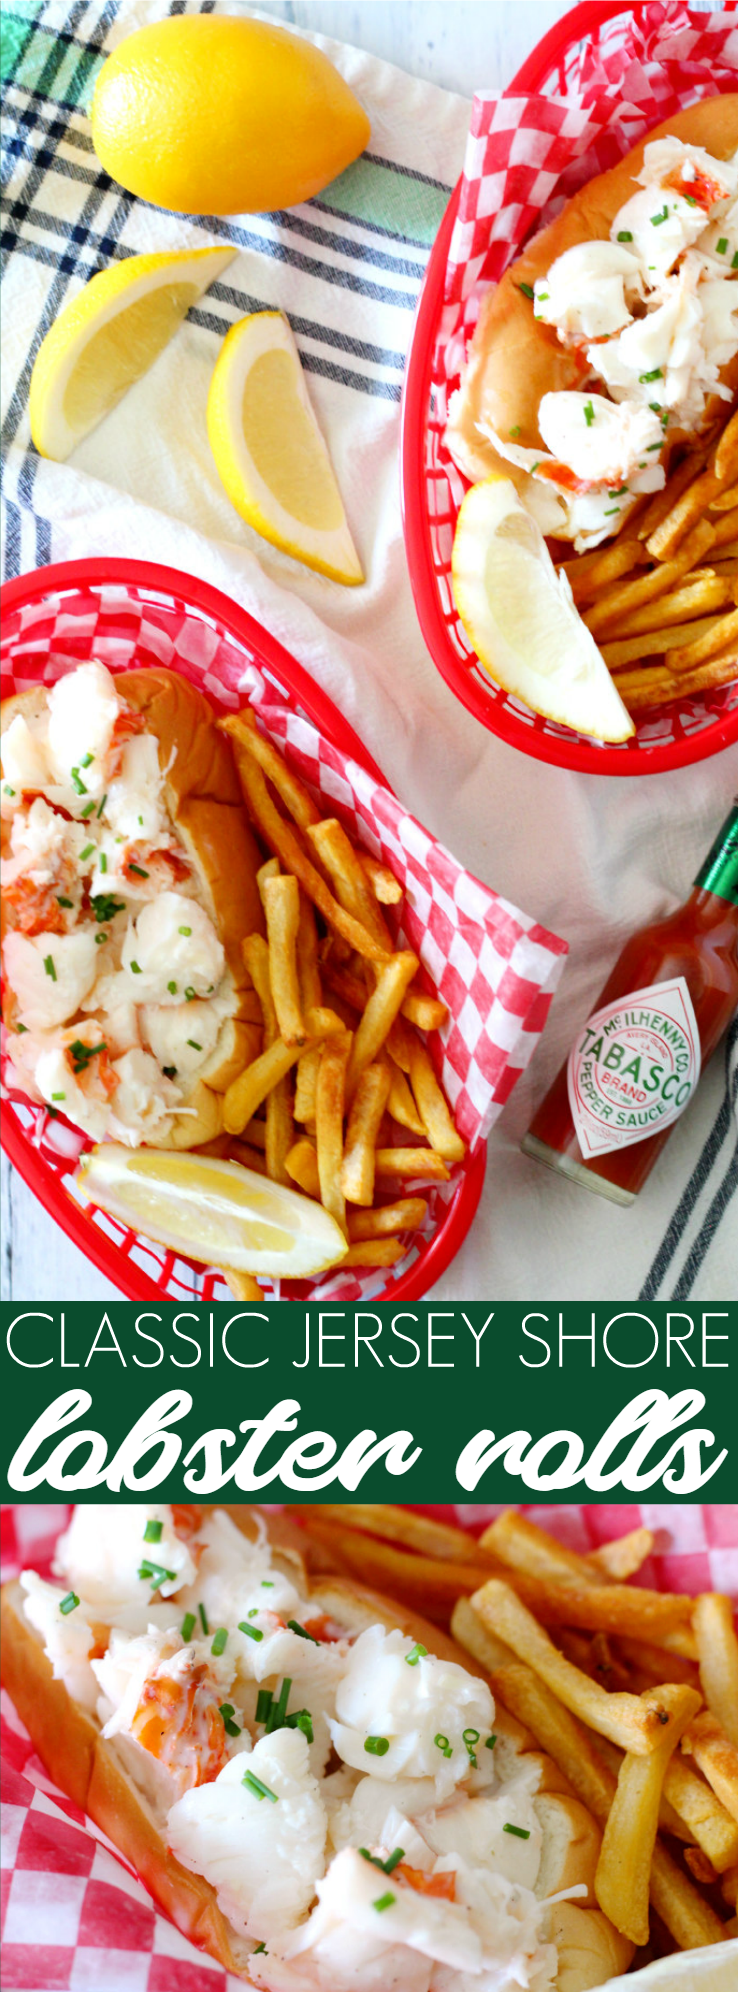 If you're craving the perfect deli-style sandwich, these Classic Jersey Shore Lobster Rolls are for you! A 30-minute meal resulting in the iconic sandwich found at waterfront restaurants down the shore.